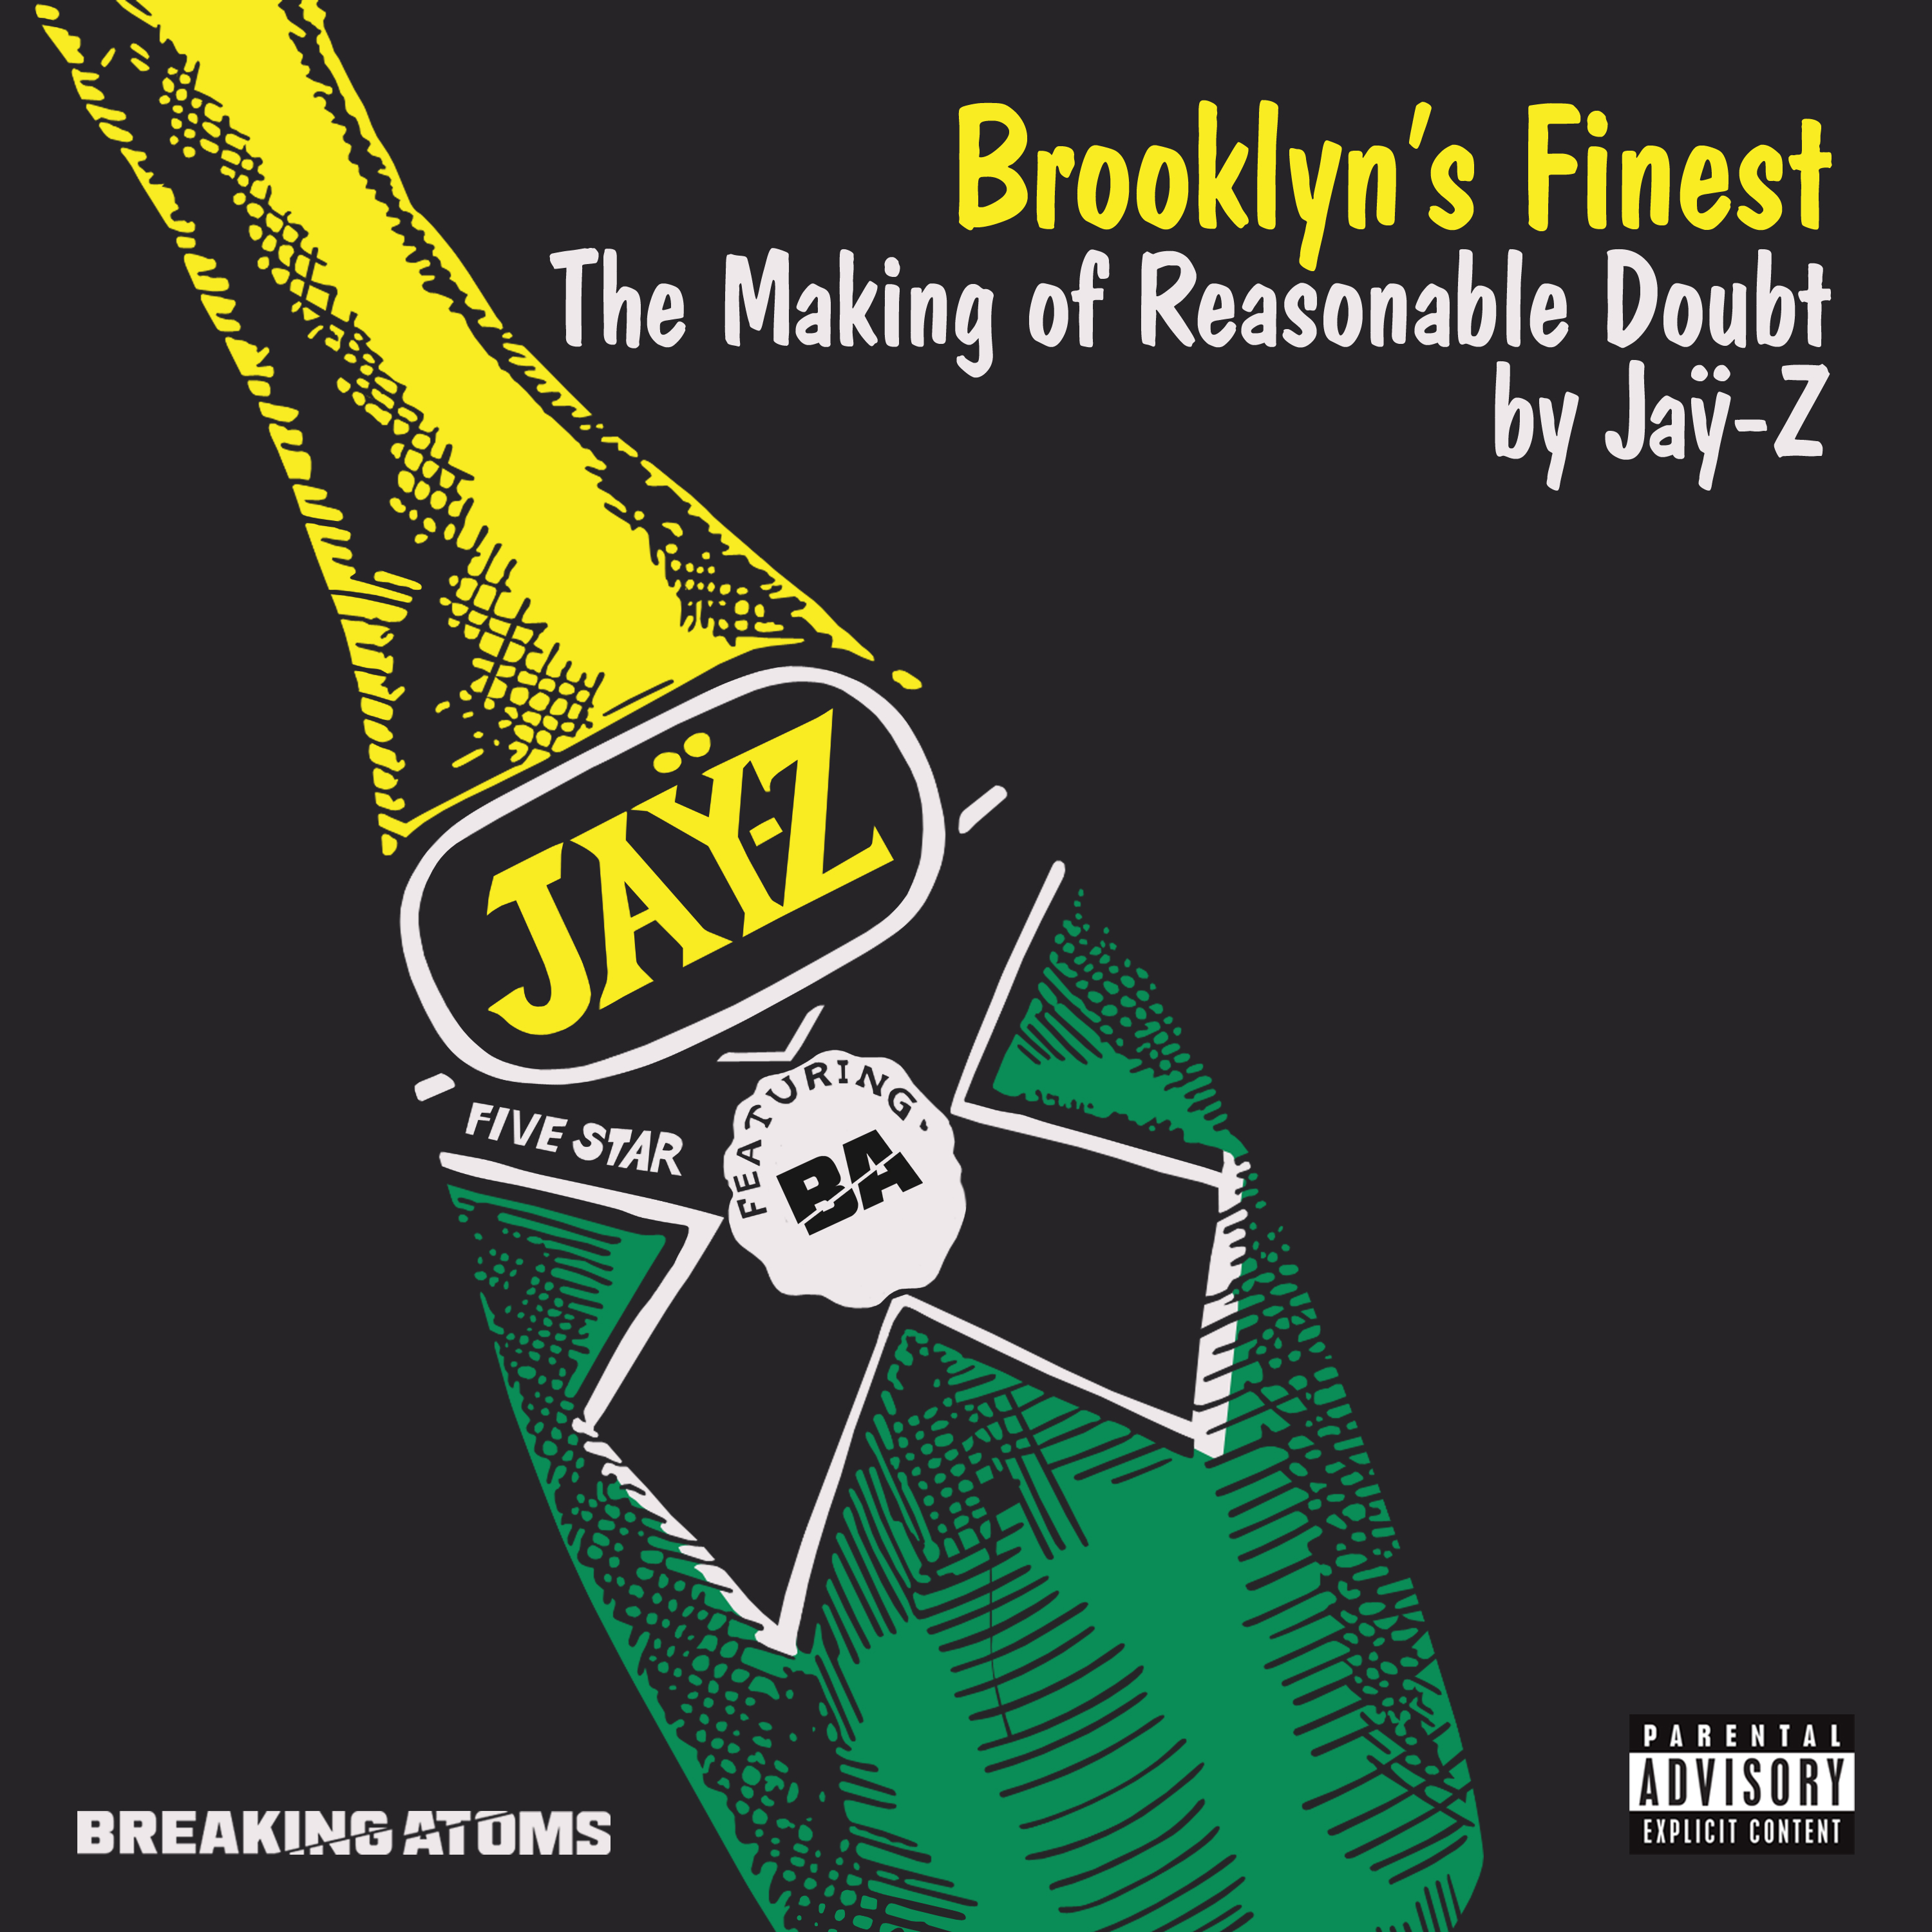 Brooklyn’s Finest: The Making of Reasonable Doubt by Jay-Z (Side A)